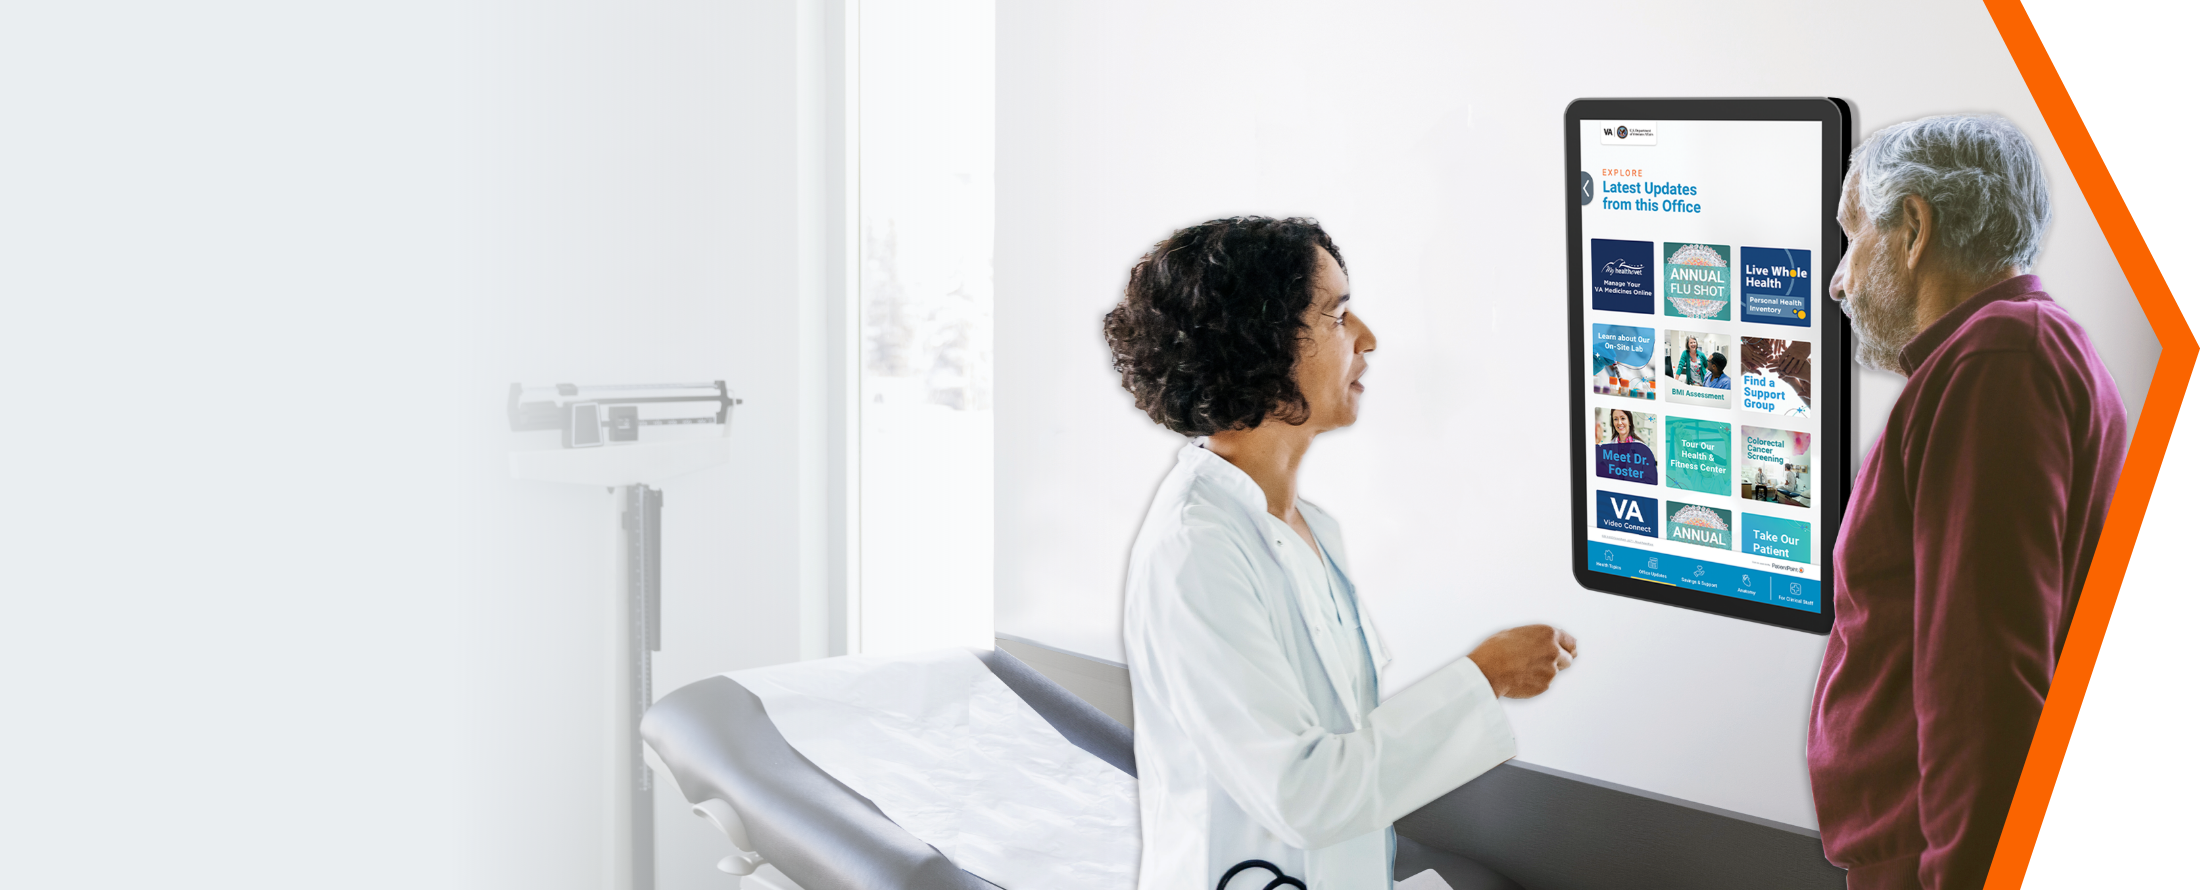 Female doctor and male patient interacting with an exam room display device.